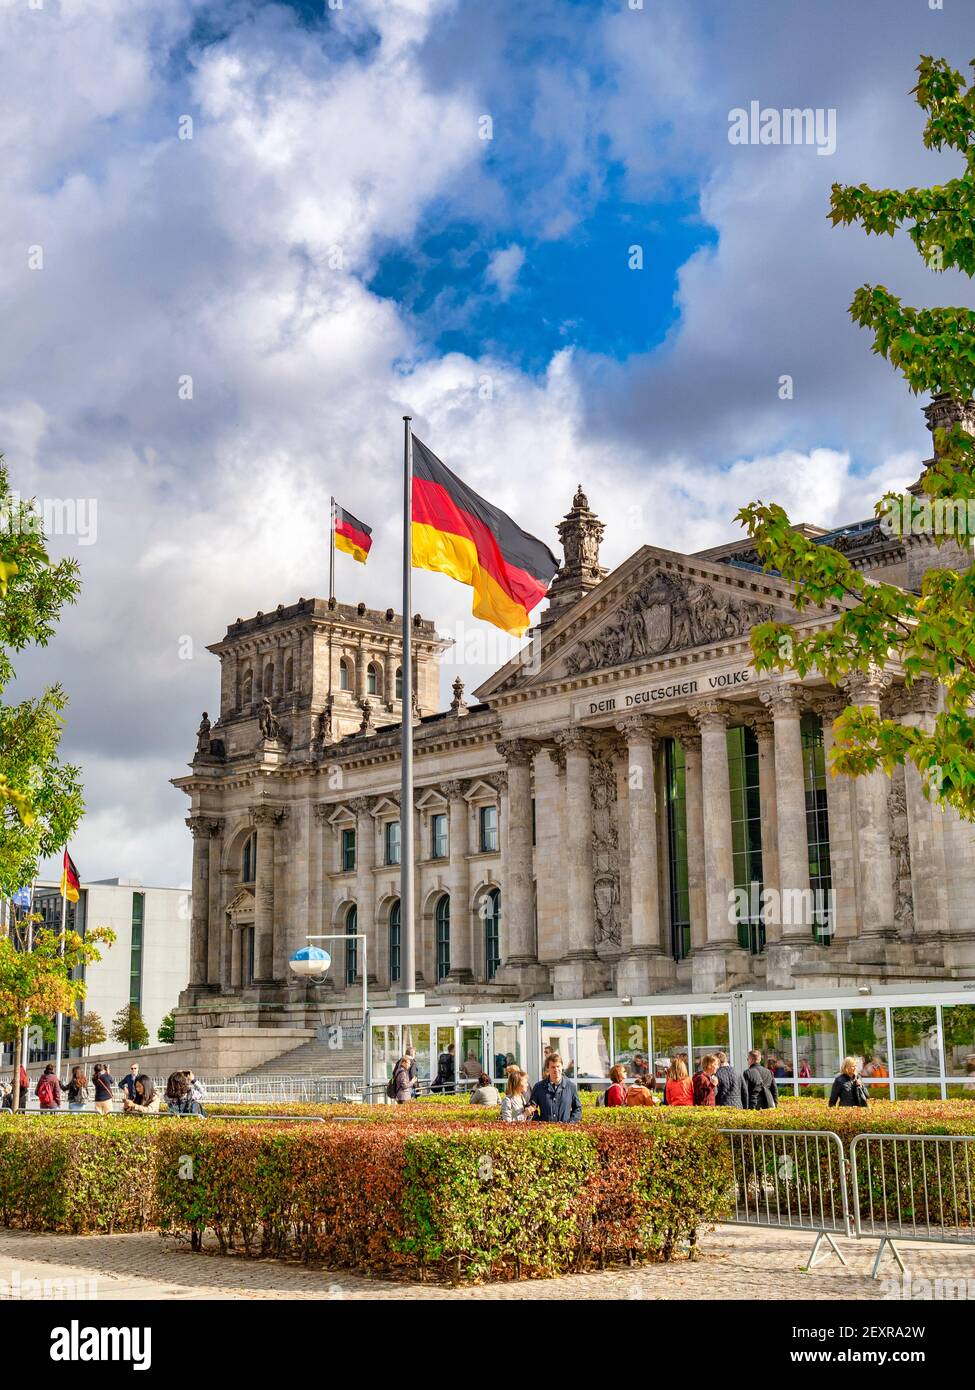 22 September 2018: Berlin, Germany - The Reichstag, German Parliament building, with flags flying, tourists sightseeing. Stock Photo